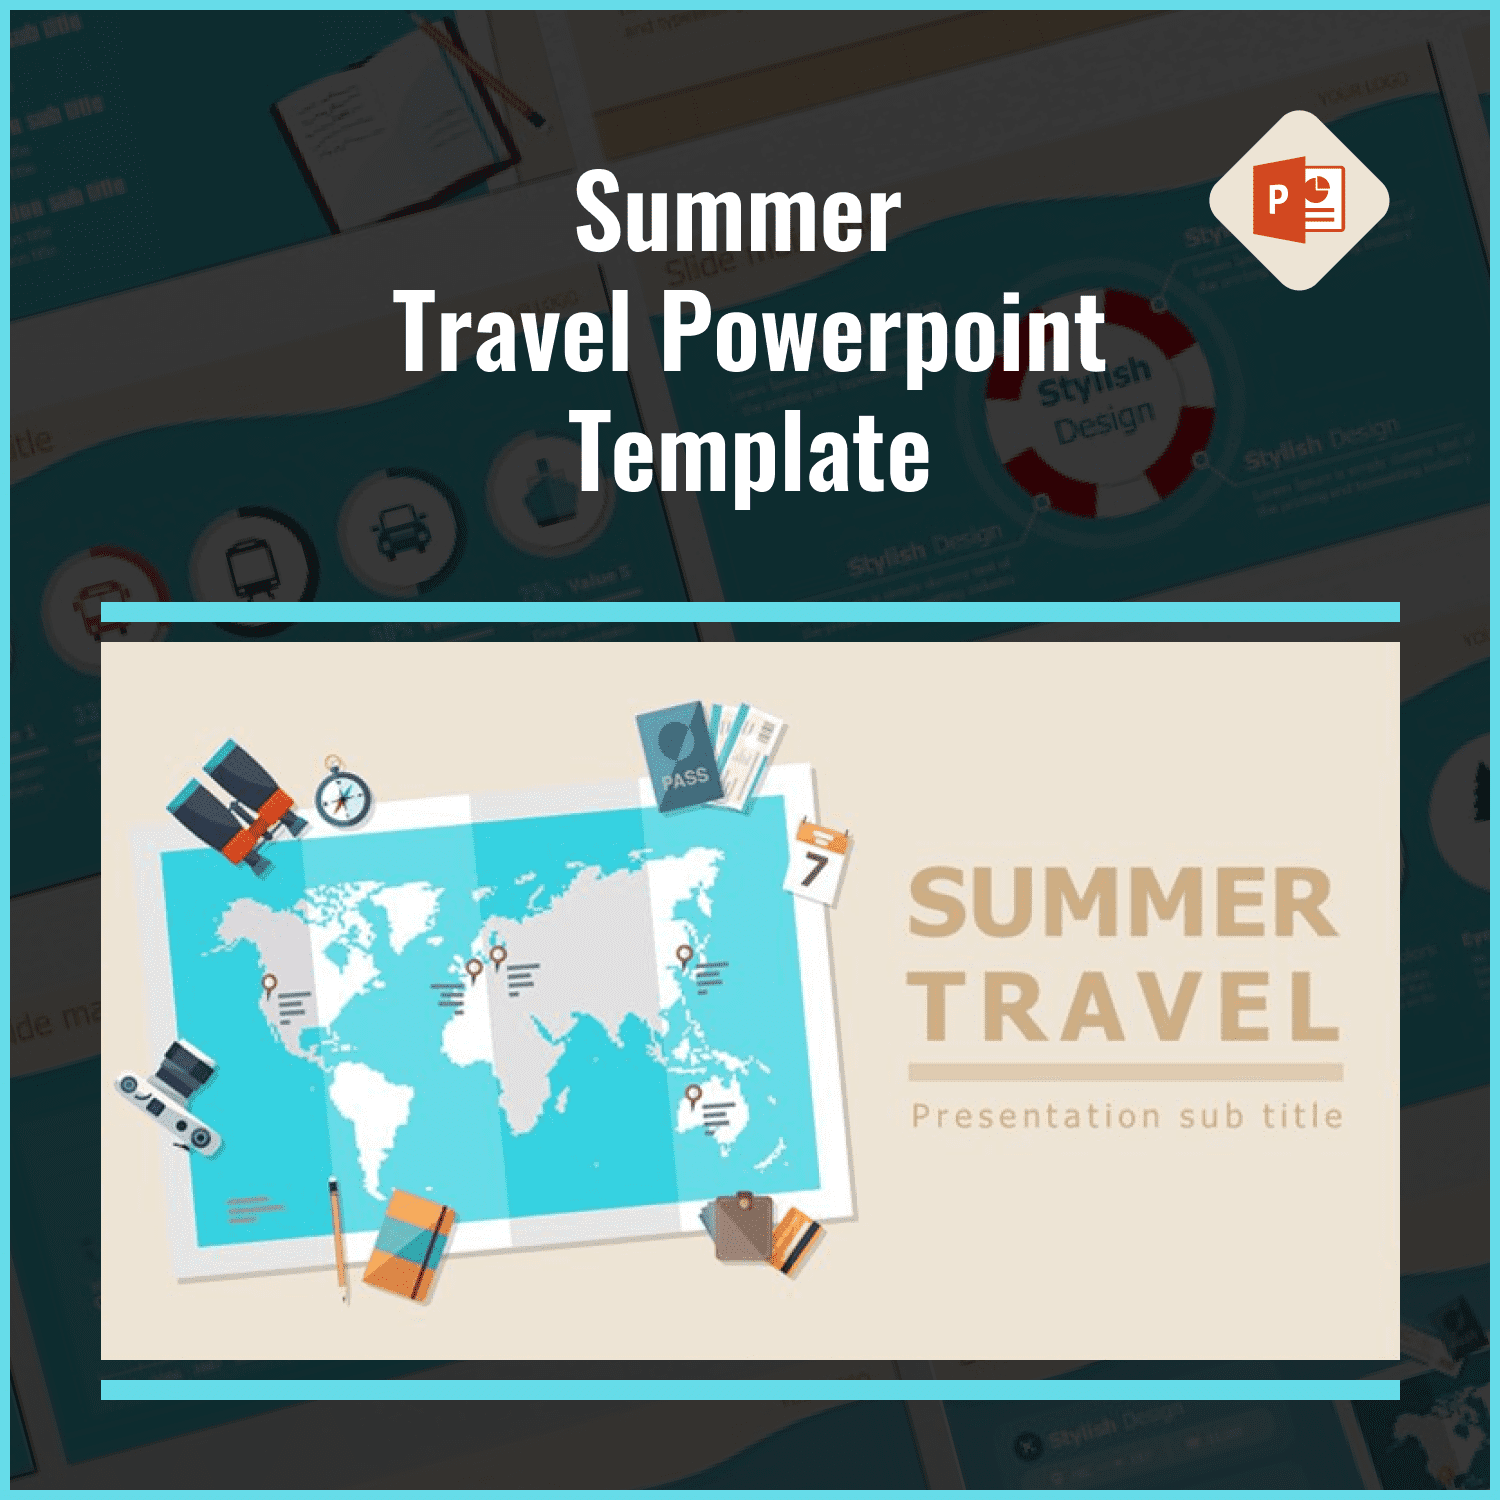 summer travel powerpoint template cover image.